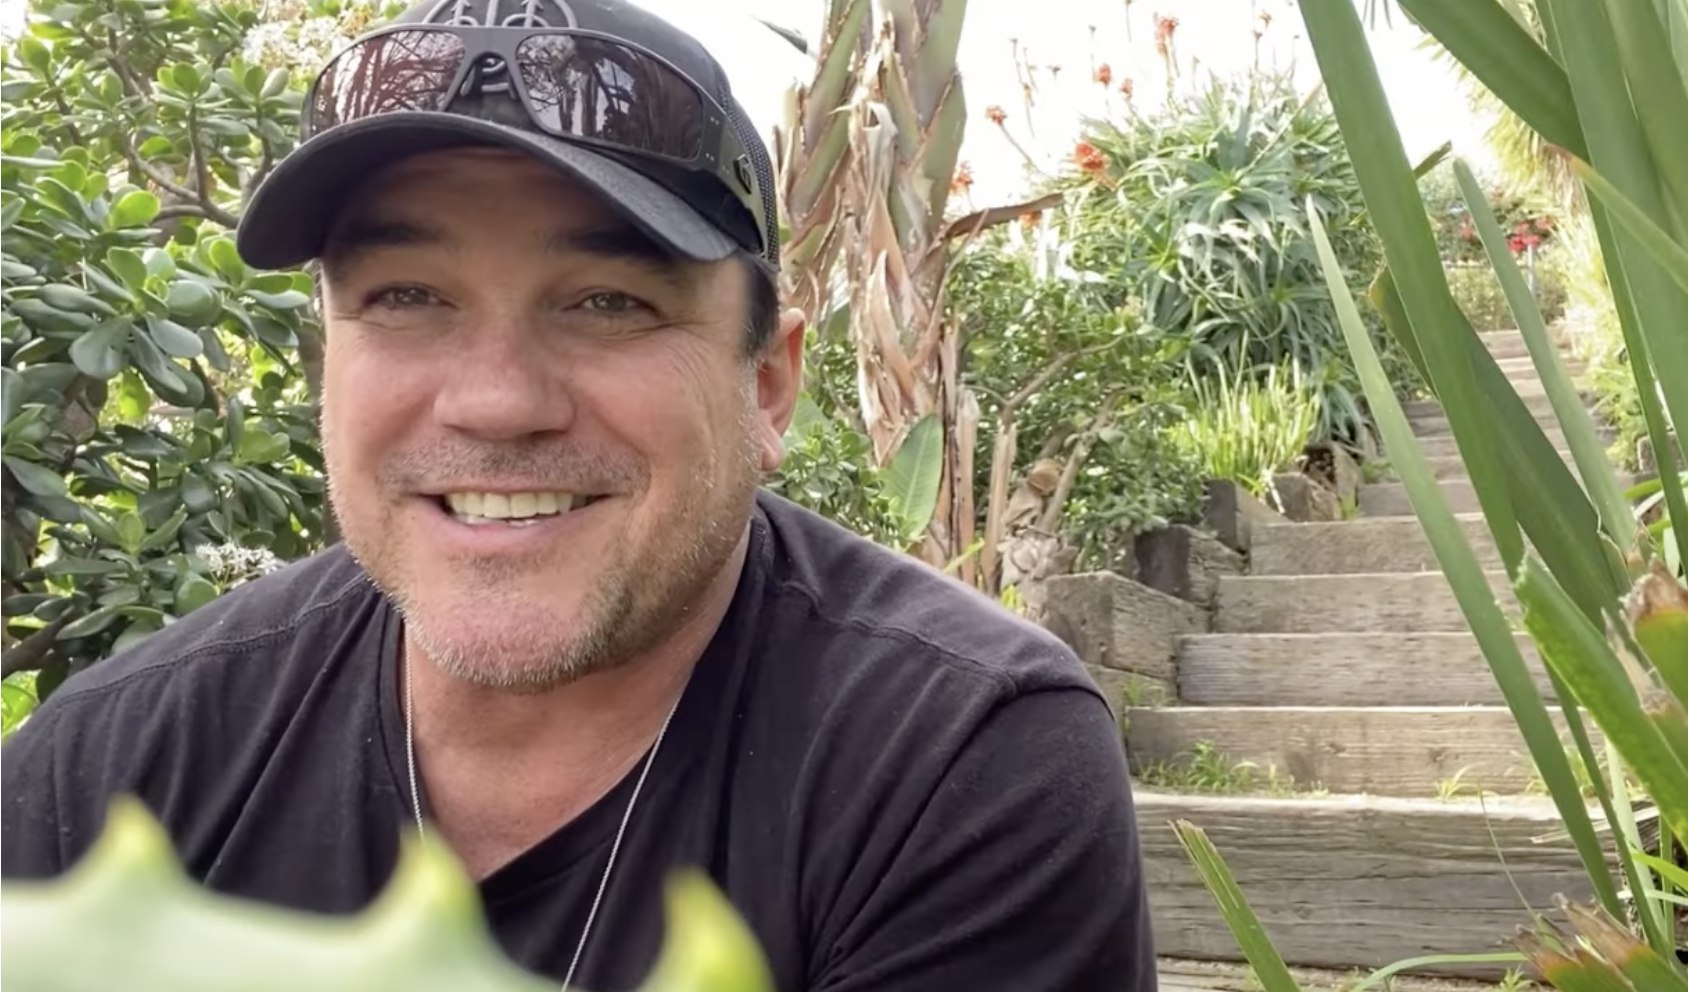 Dean Cain at his home on March, 2023 | Source: YouTube/An American Homestead